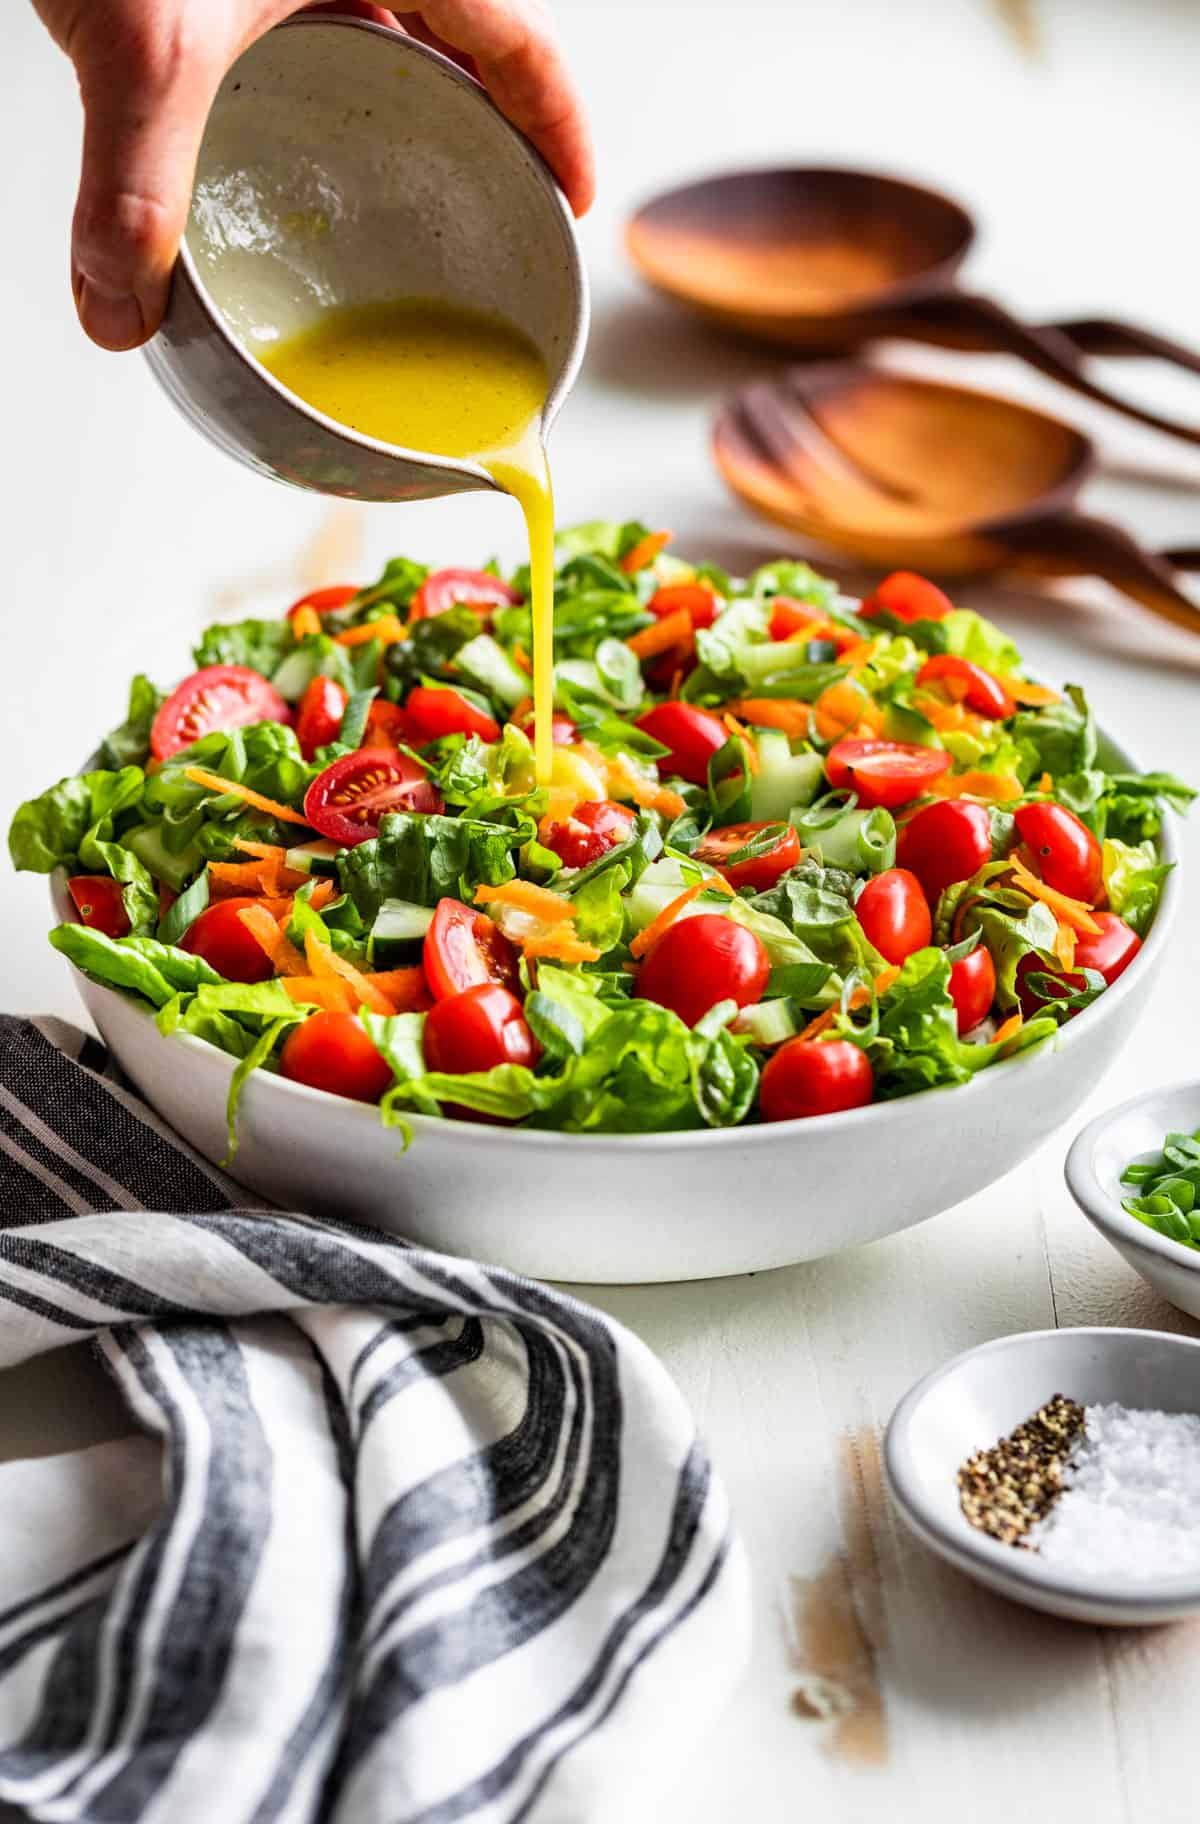 Lemon Vinaigrette being poured over a white bowl filled with Easy Green Salad.